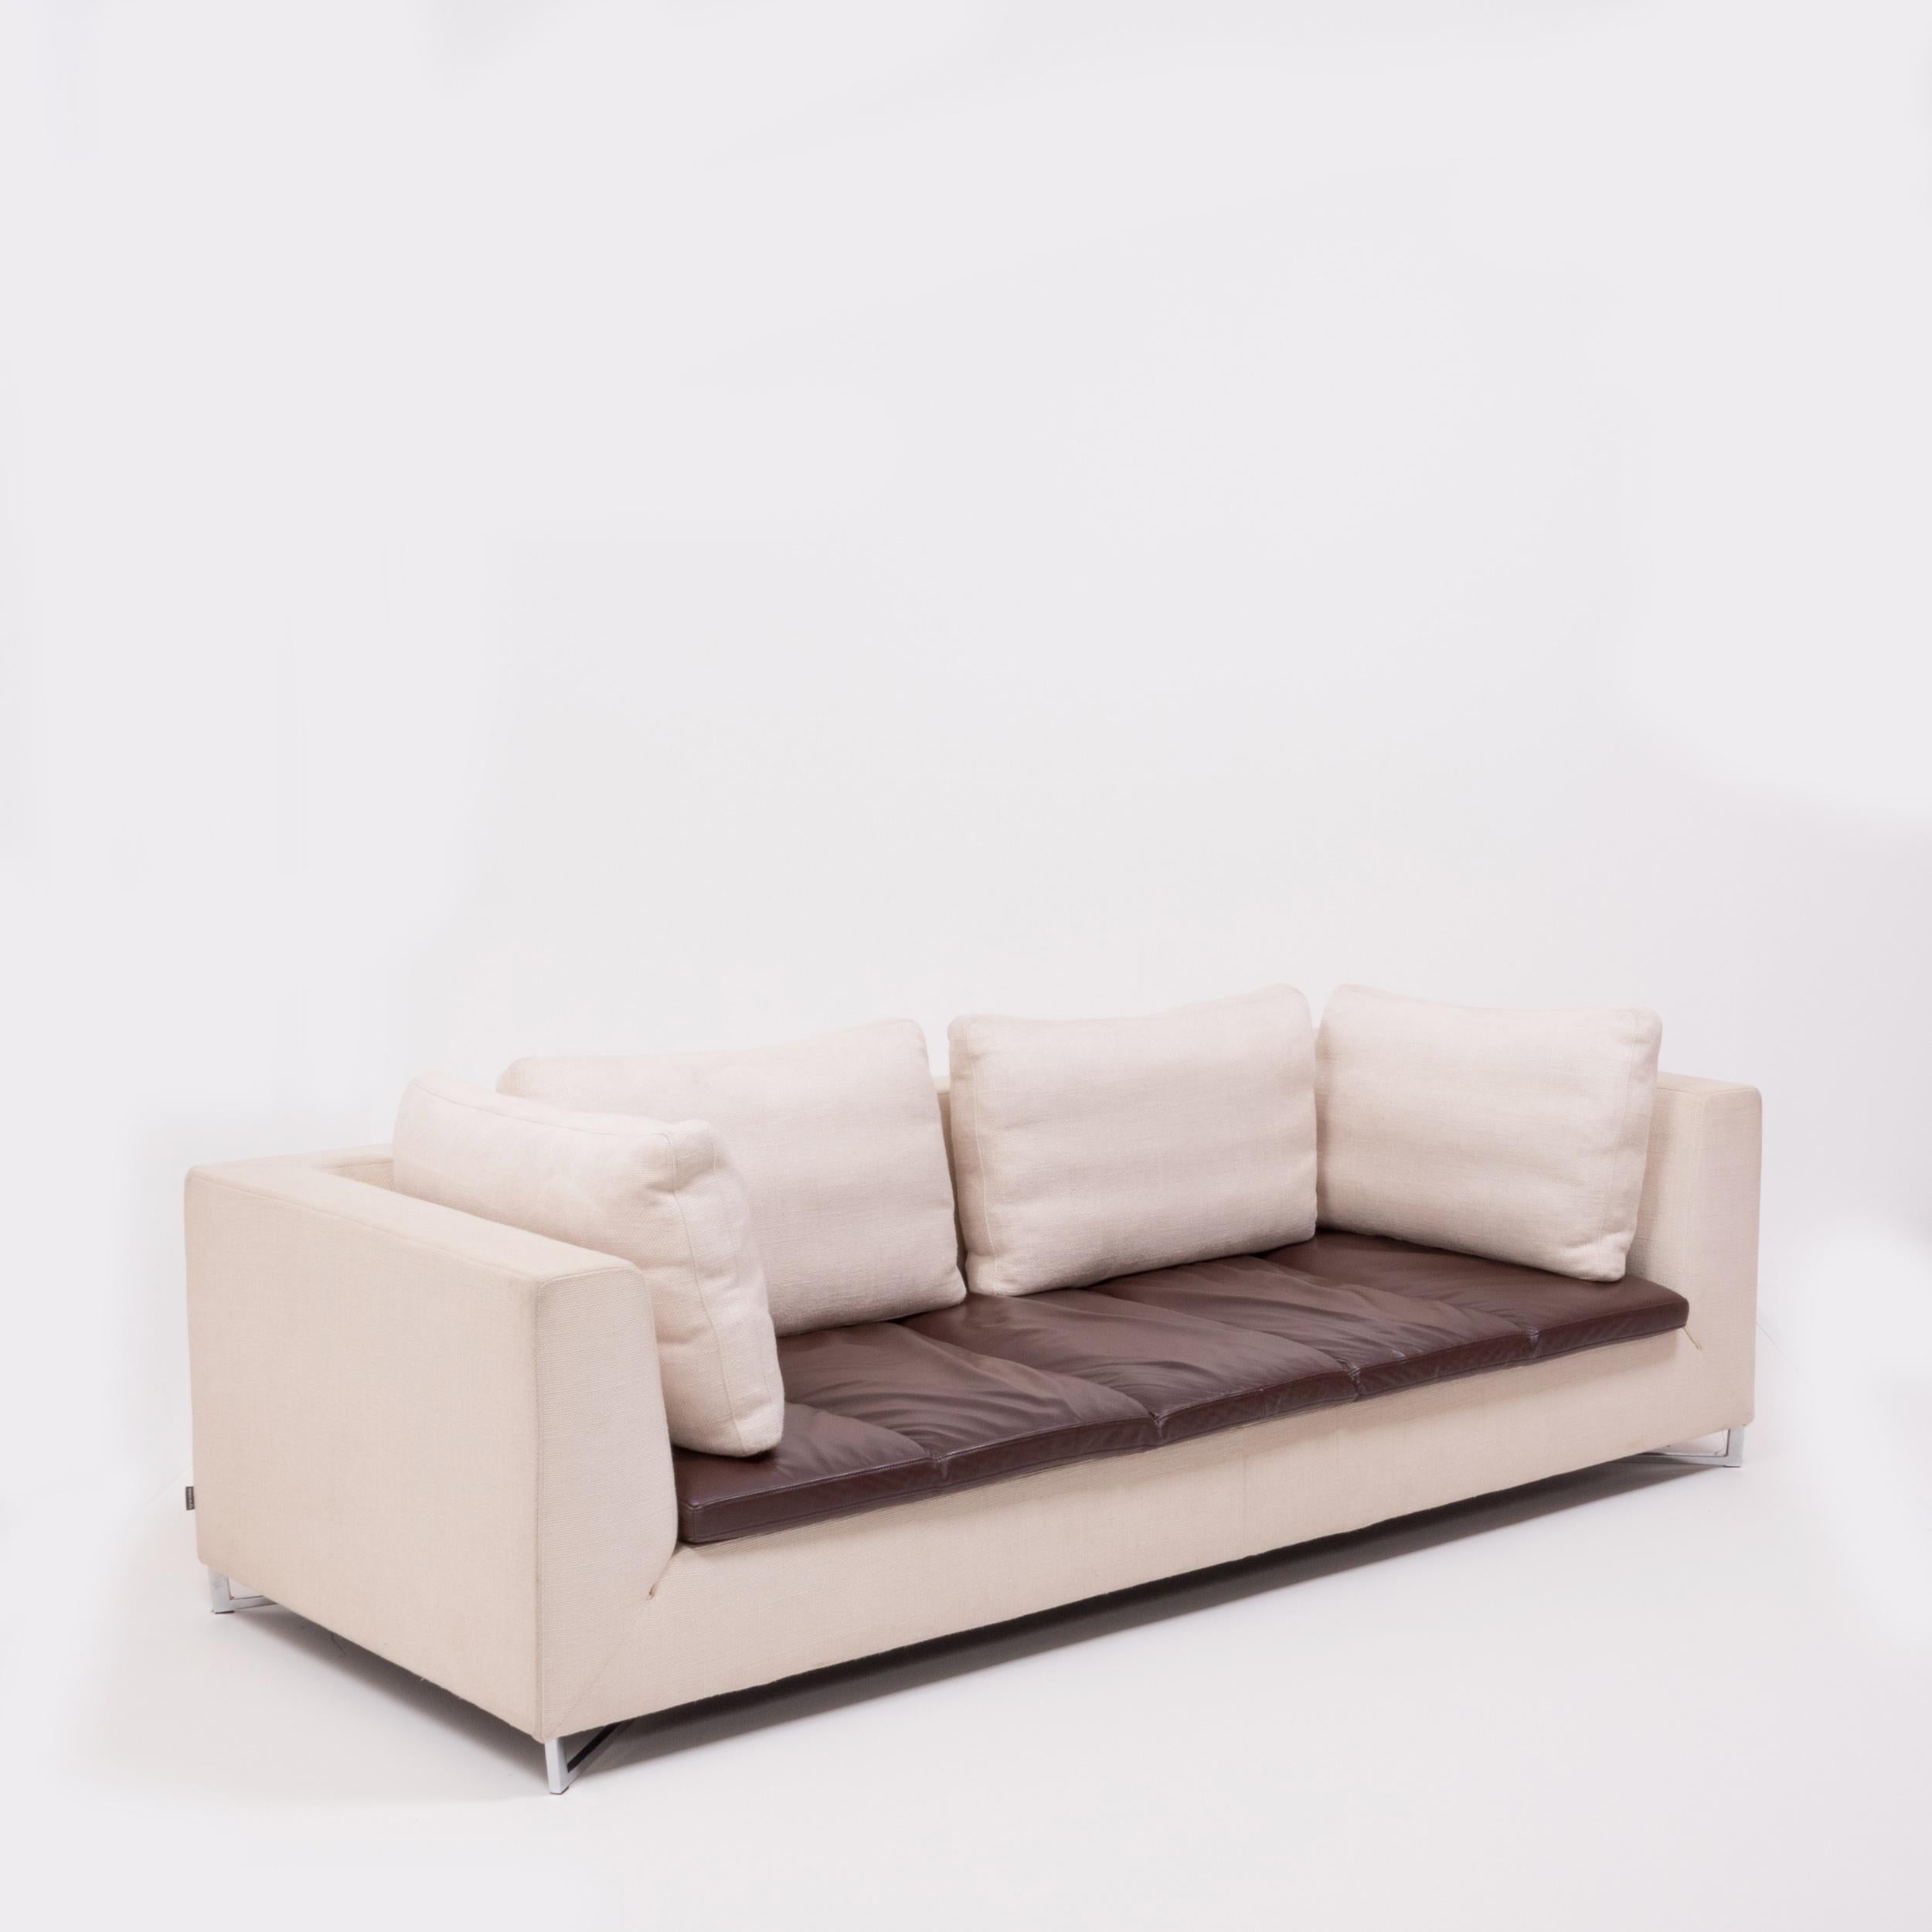 Designed by Didier Gomez for Ligne Roset, this Feng three-seat sofa combines modern elegance with ultimate comfort.

The sturdy frame is upholstered in ivory woven fabric and sits on an angular chrome base. 

The fabric is contrasted by the